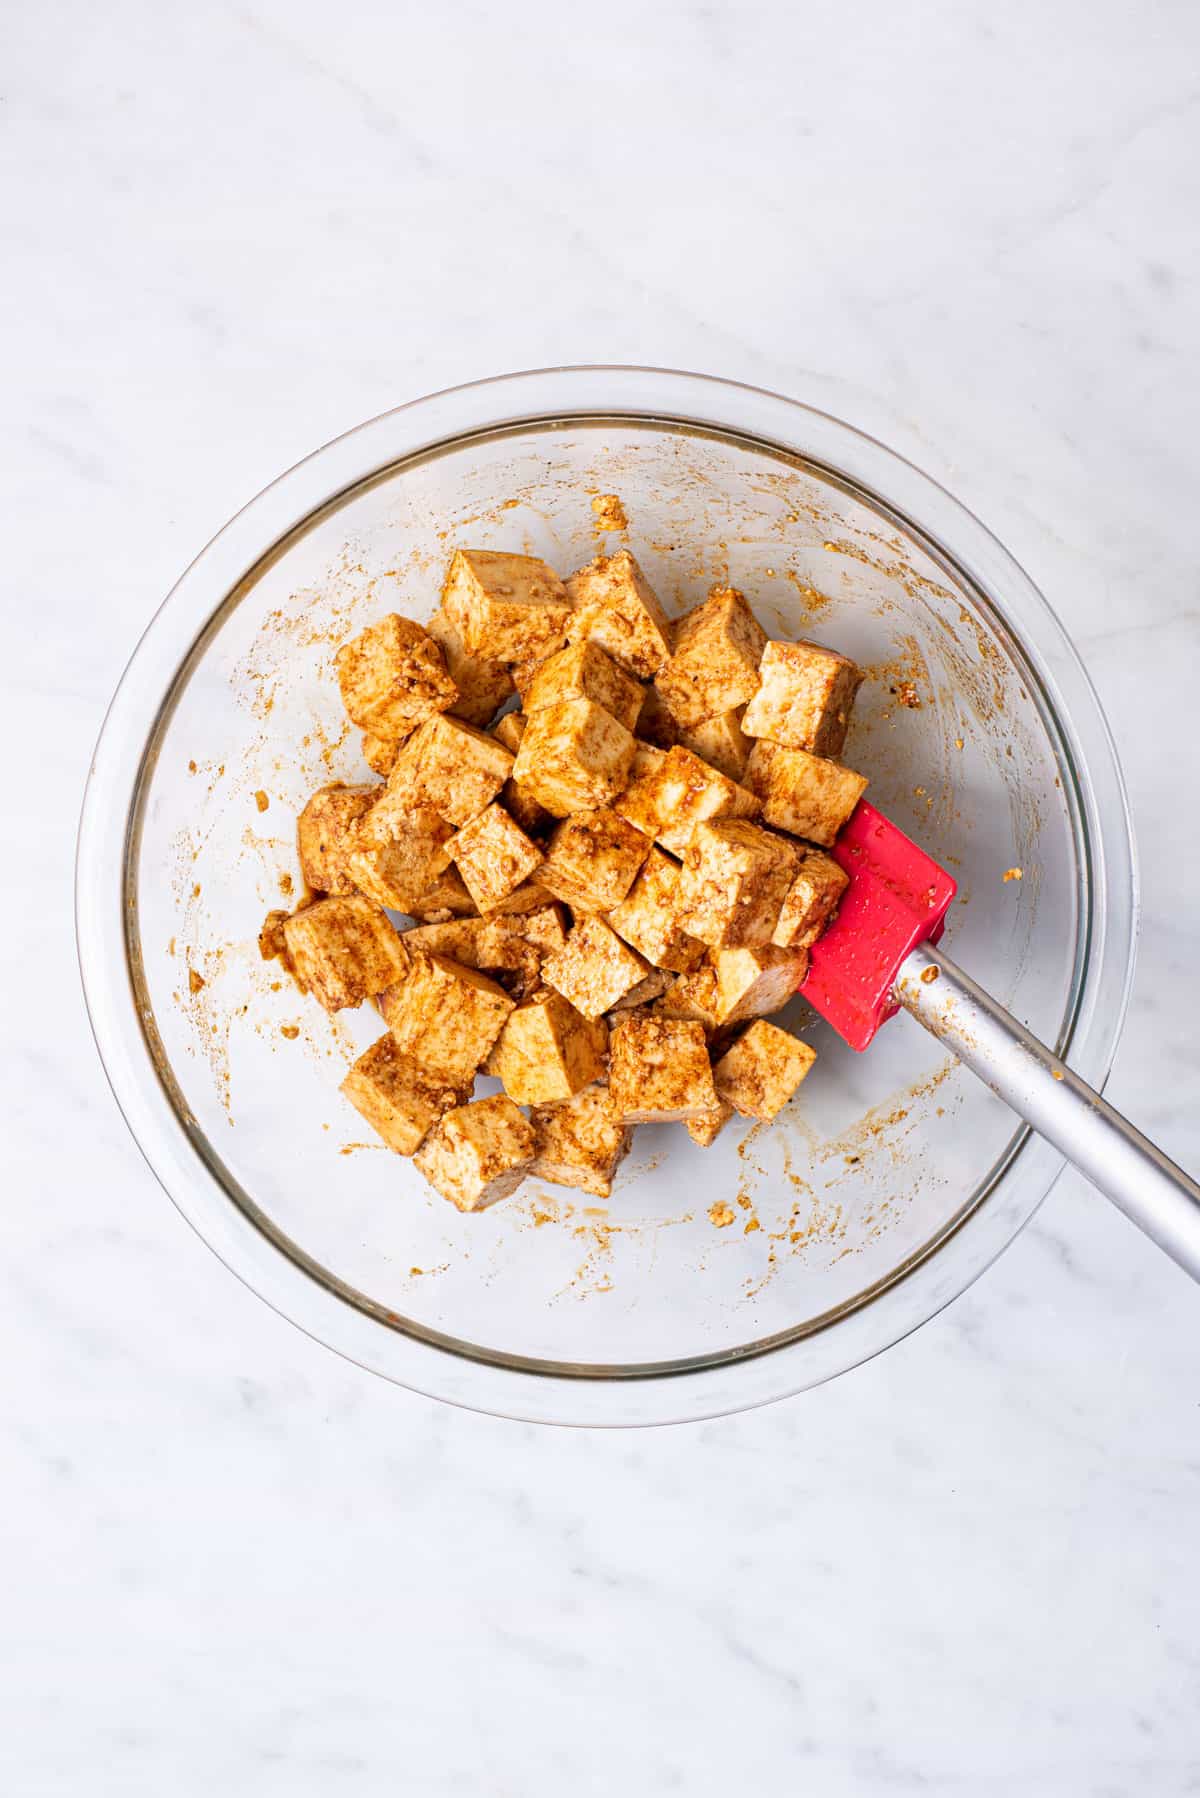 Cubes of tofu marinating in a glass bowl.